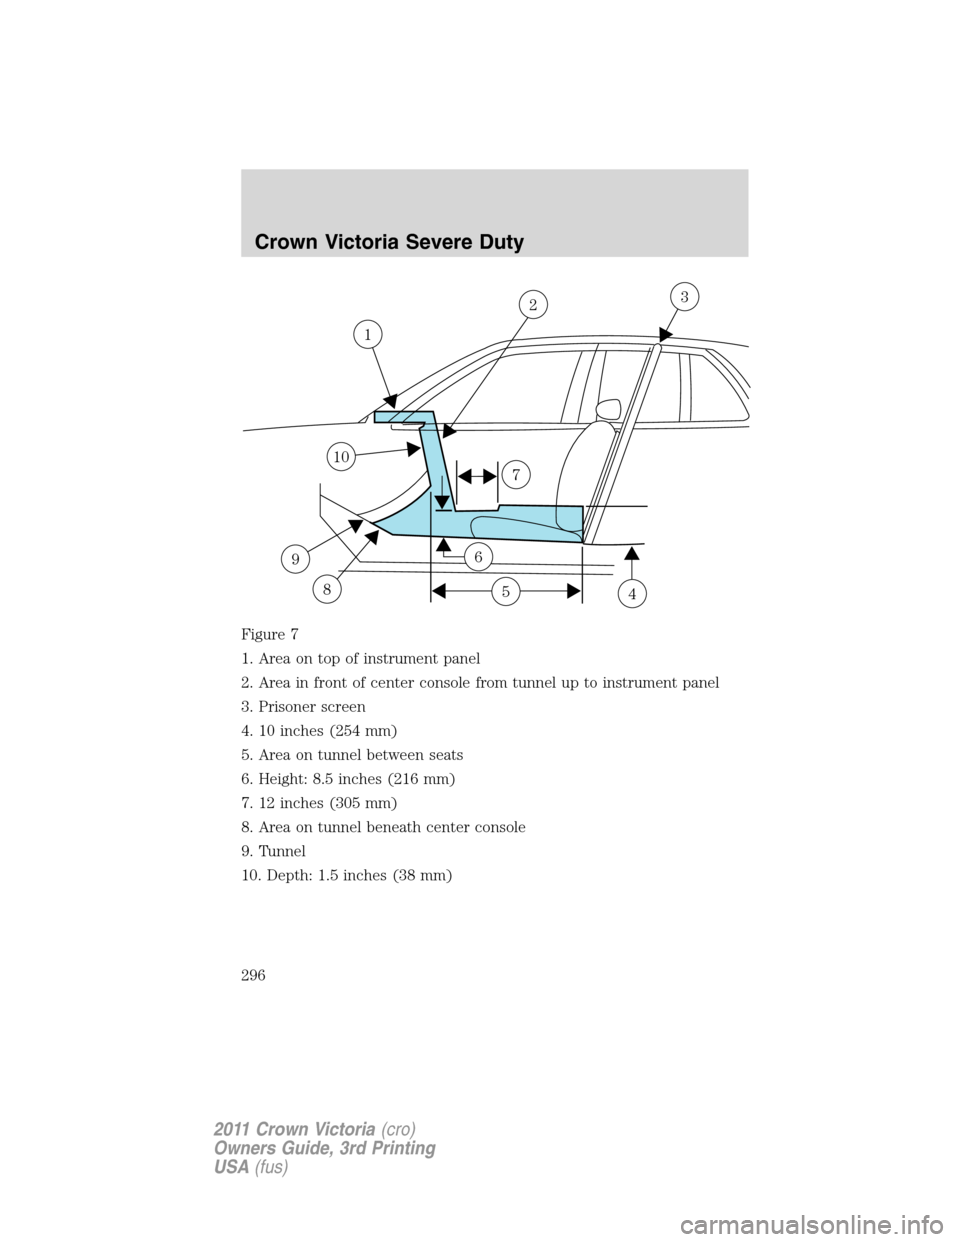 Mercury Grand Marquis 1011  Owners Manuals Figure 7
1. Area on top of instrument panel
2. Area in front of center console from tunnel up to instrument panel
3. Prisoner screen
4. 10 inches (254 mm)
5. Area on tunnel between seats
6. Height: 8.